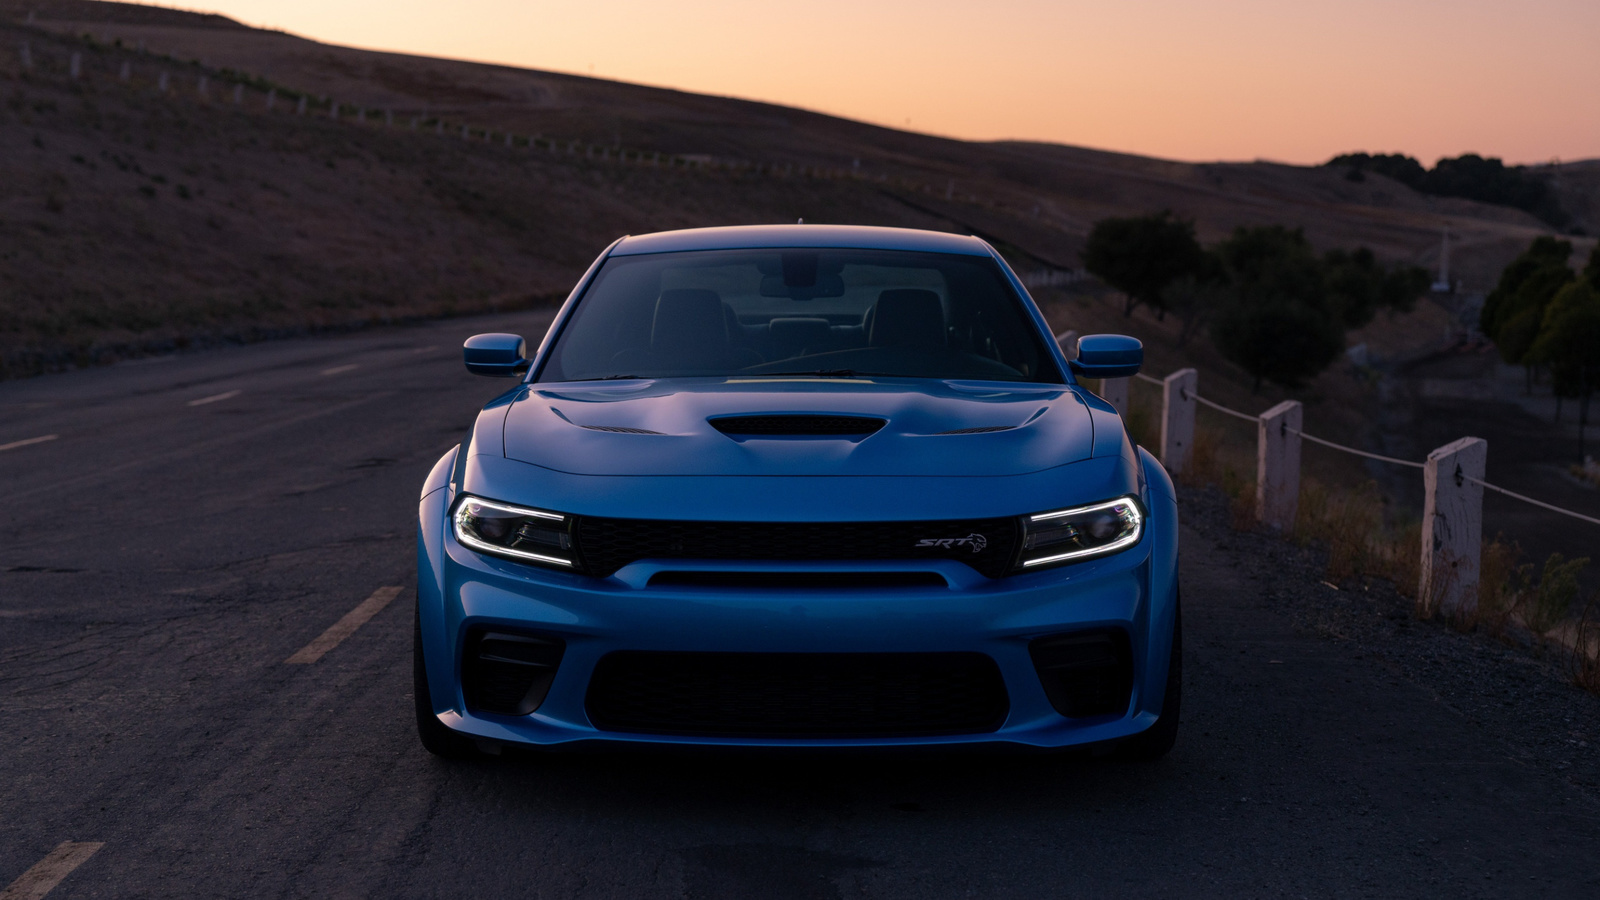 dodge charger srt, hellcat widebody, daytona 50th anniversary edition, front view, sports sedan, tuning charger, new, blue, charger, american cars, dodge